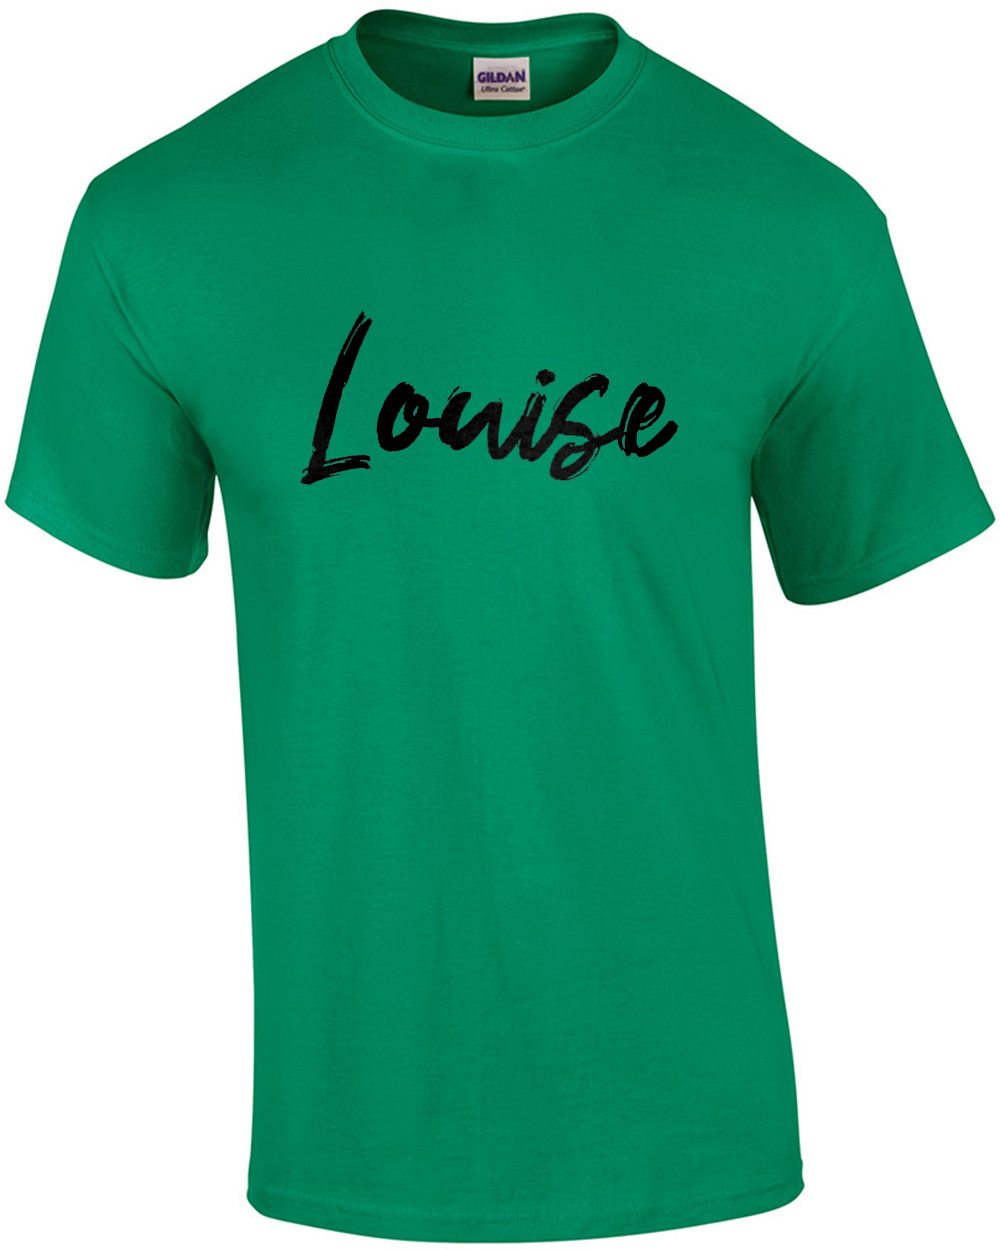 Louise - Thelma and Louise - 90's T-Shirt | eBay